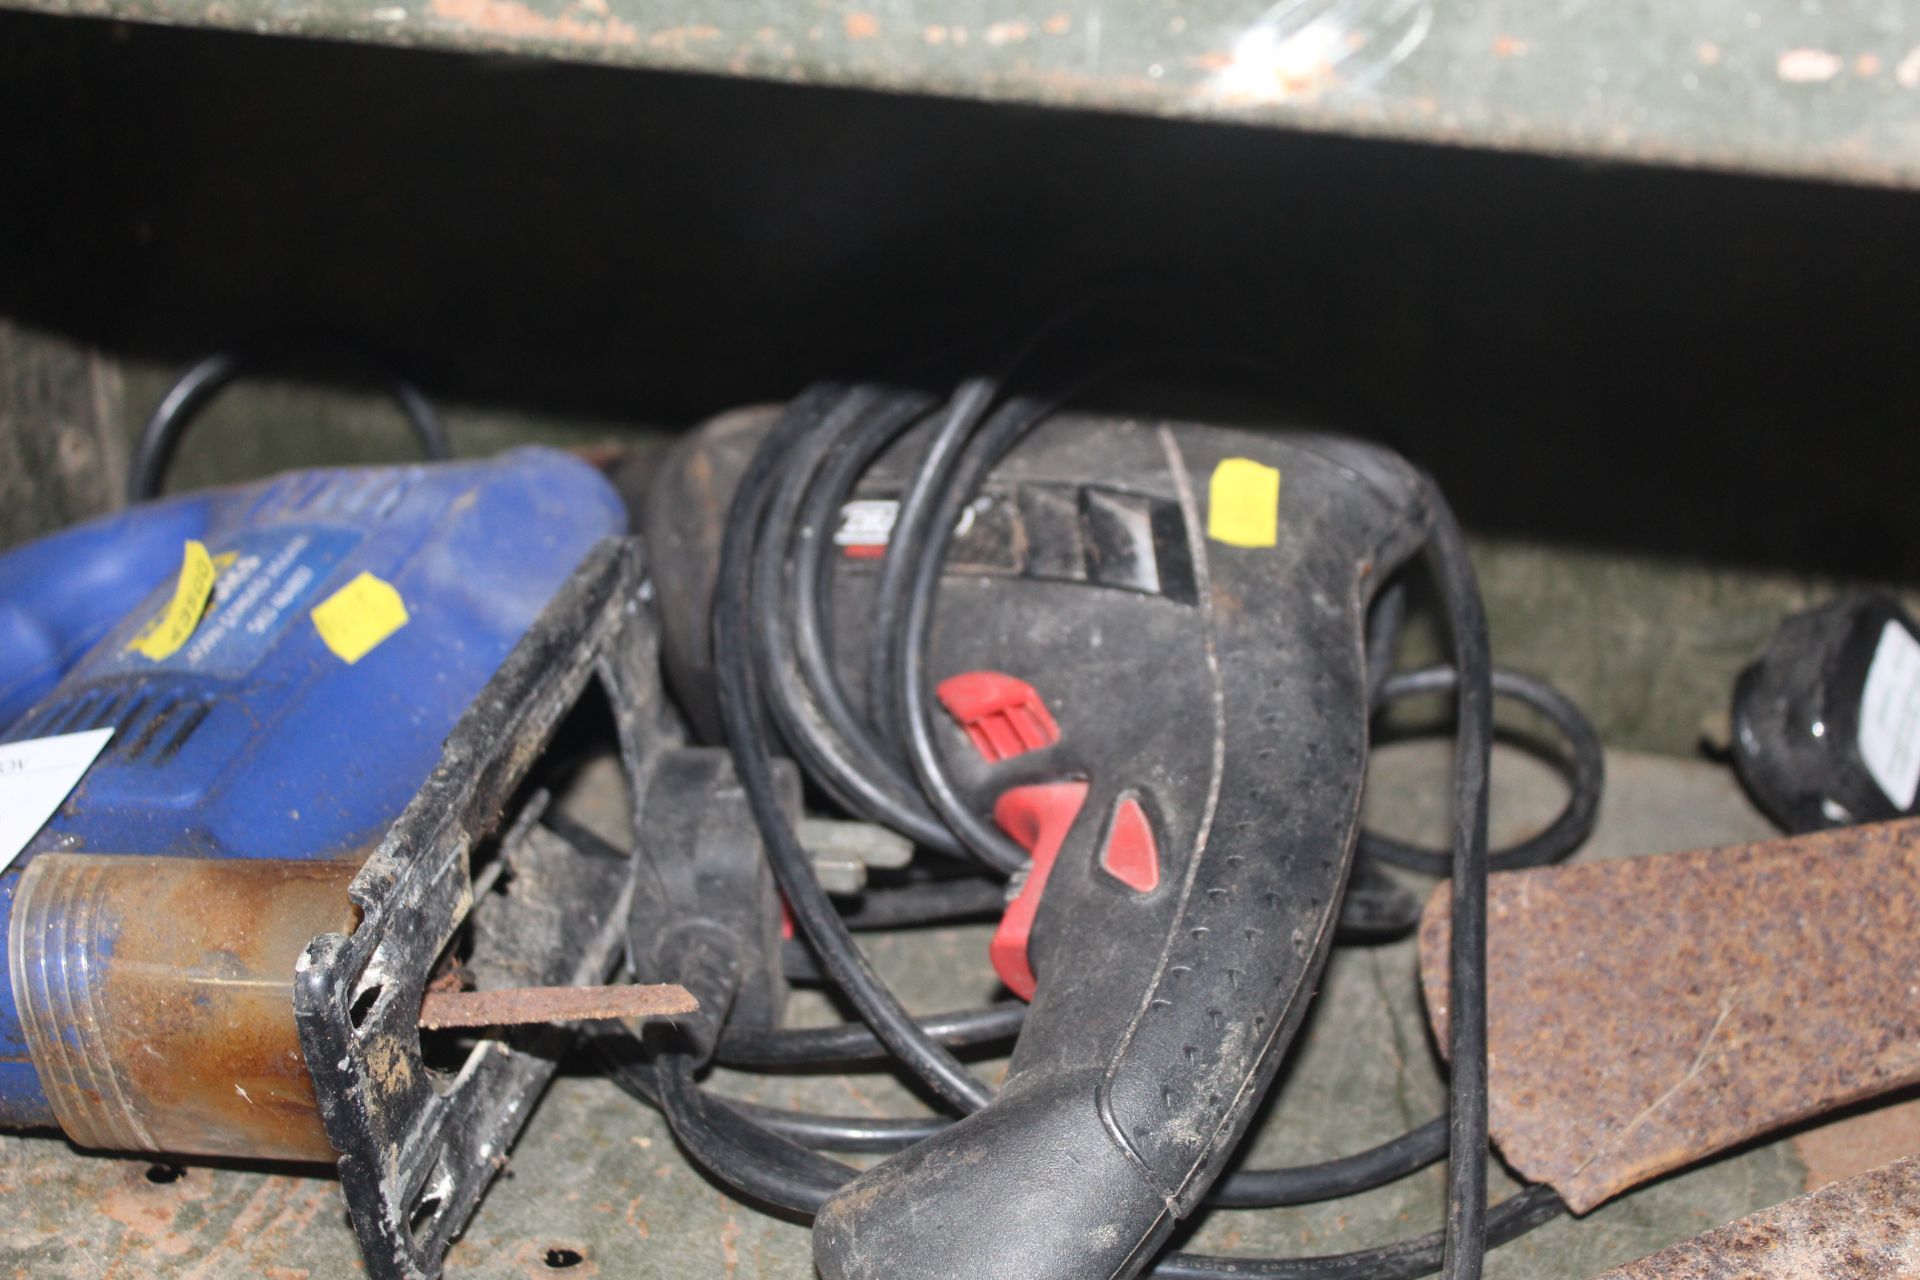 240v Draper drill and a jigsaw. - Image 2 of 2